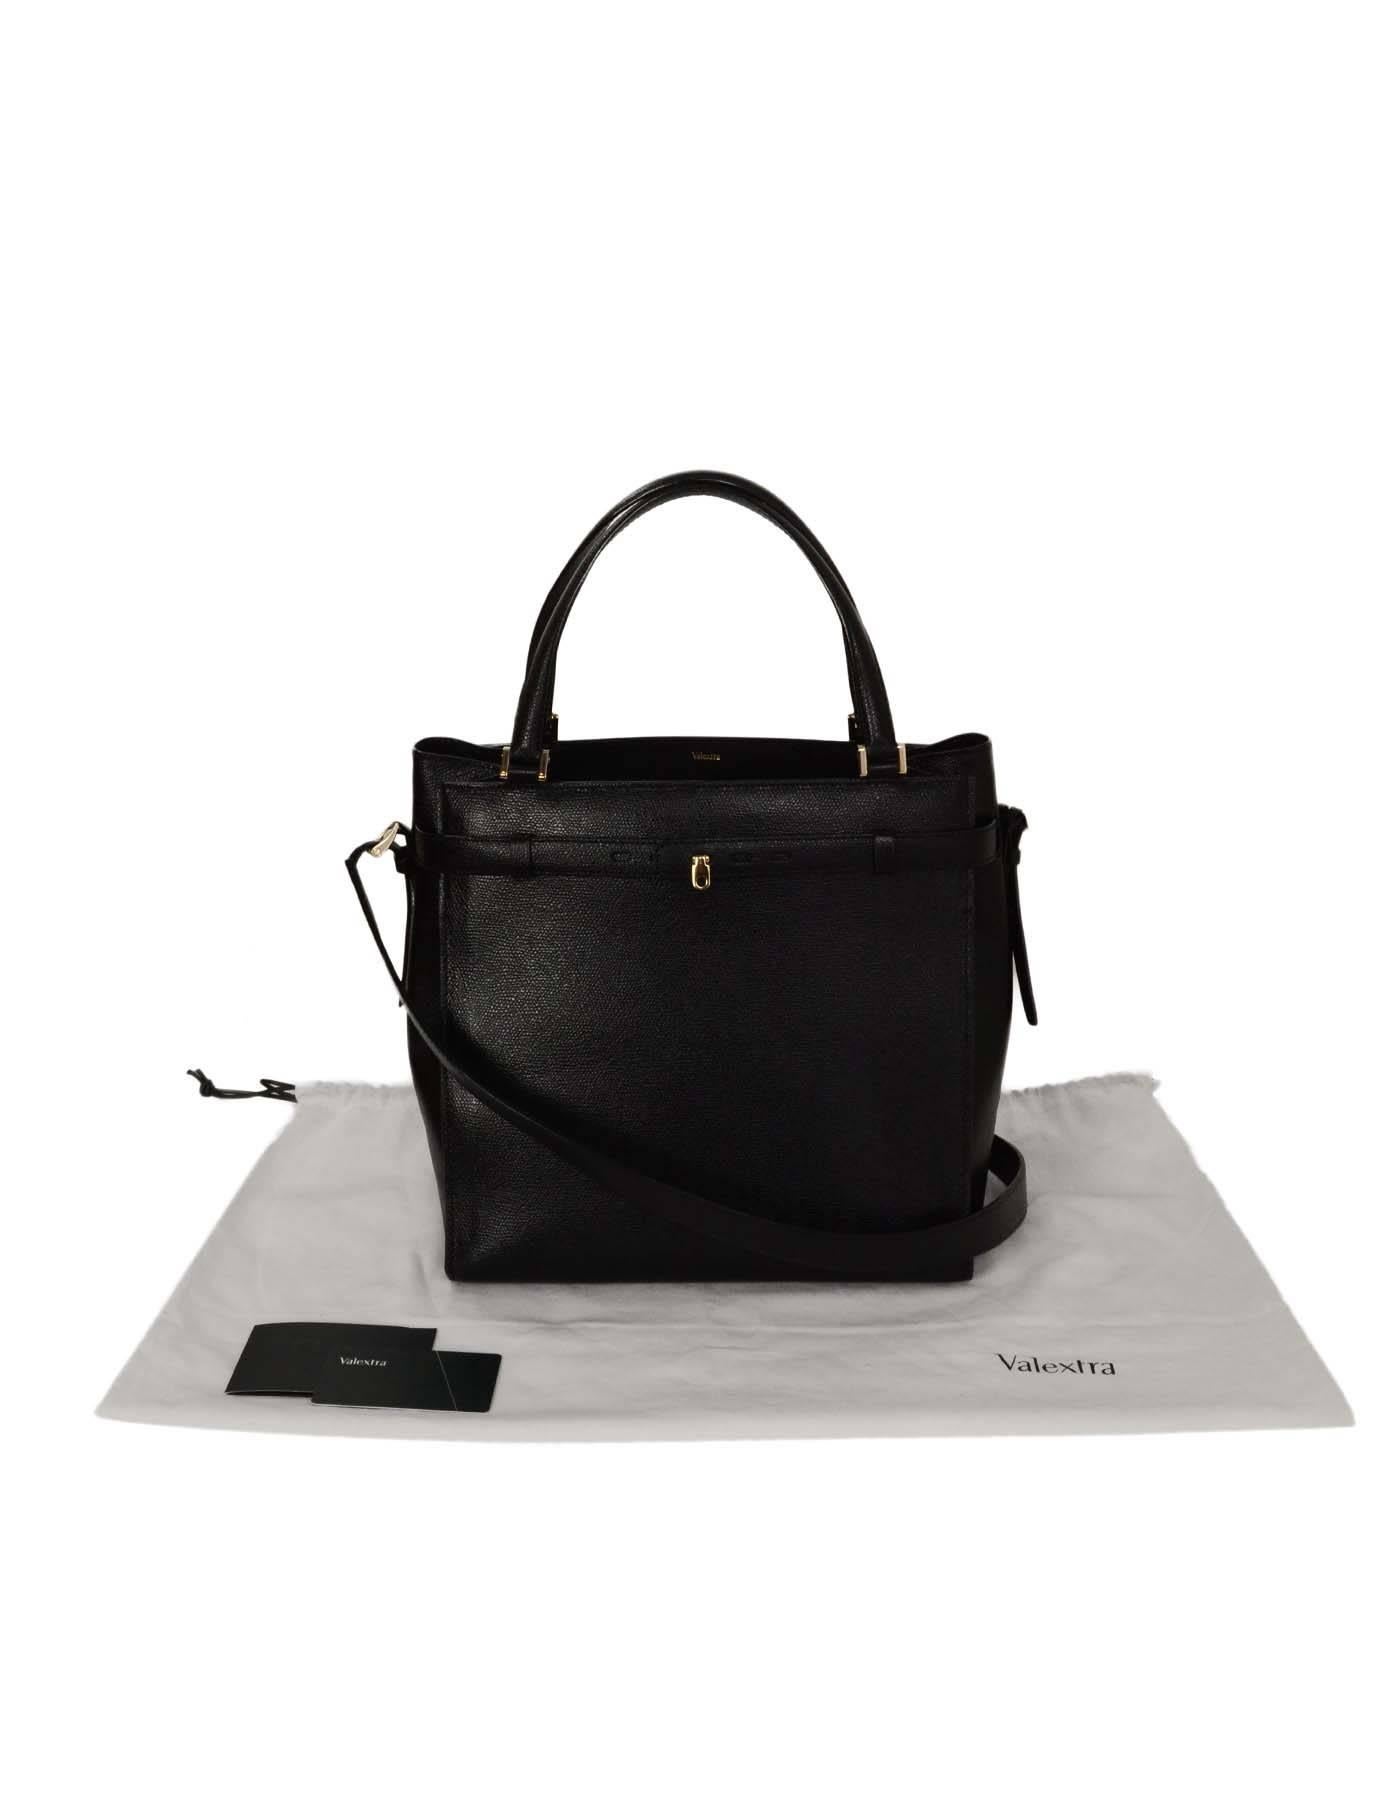 Valextra Black Textured Leather Large B-Cube Tote Bag SHW  rt. $3, 700 4